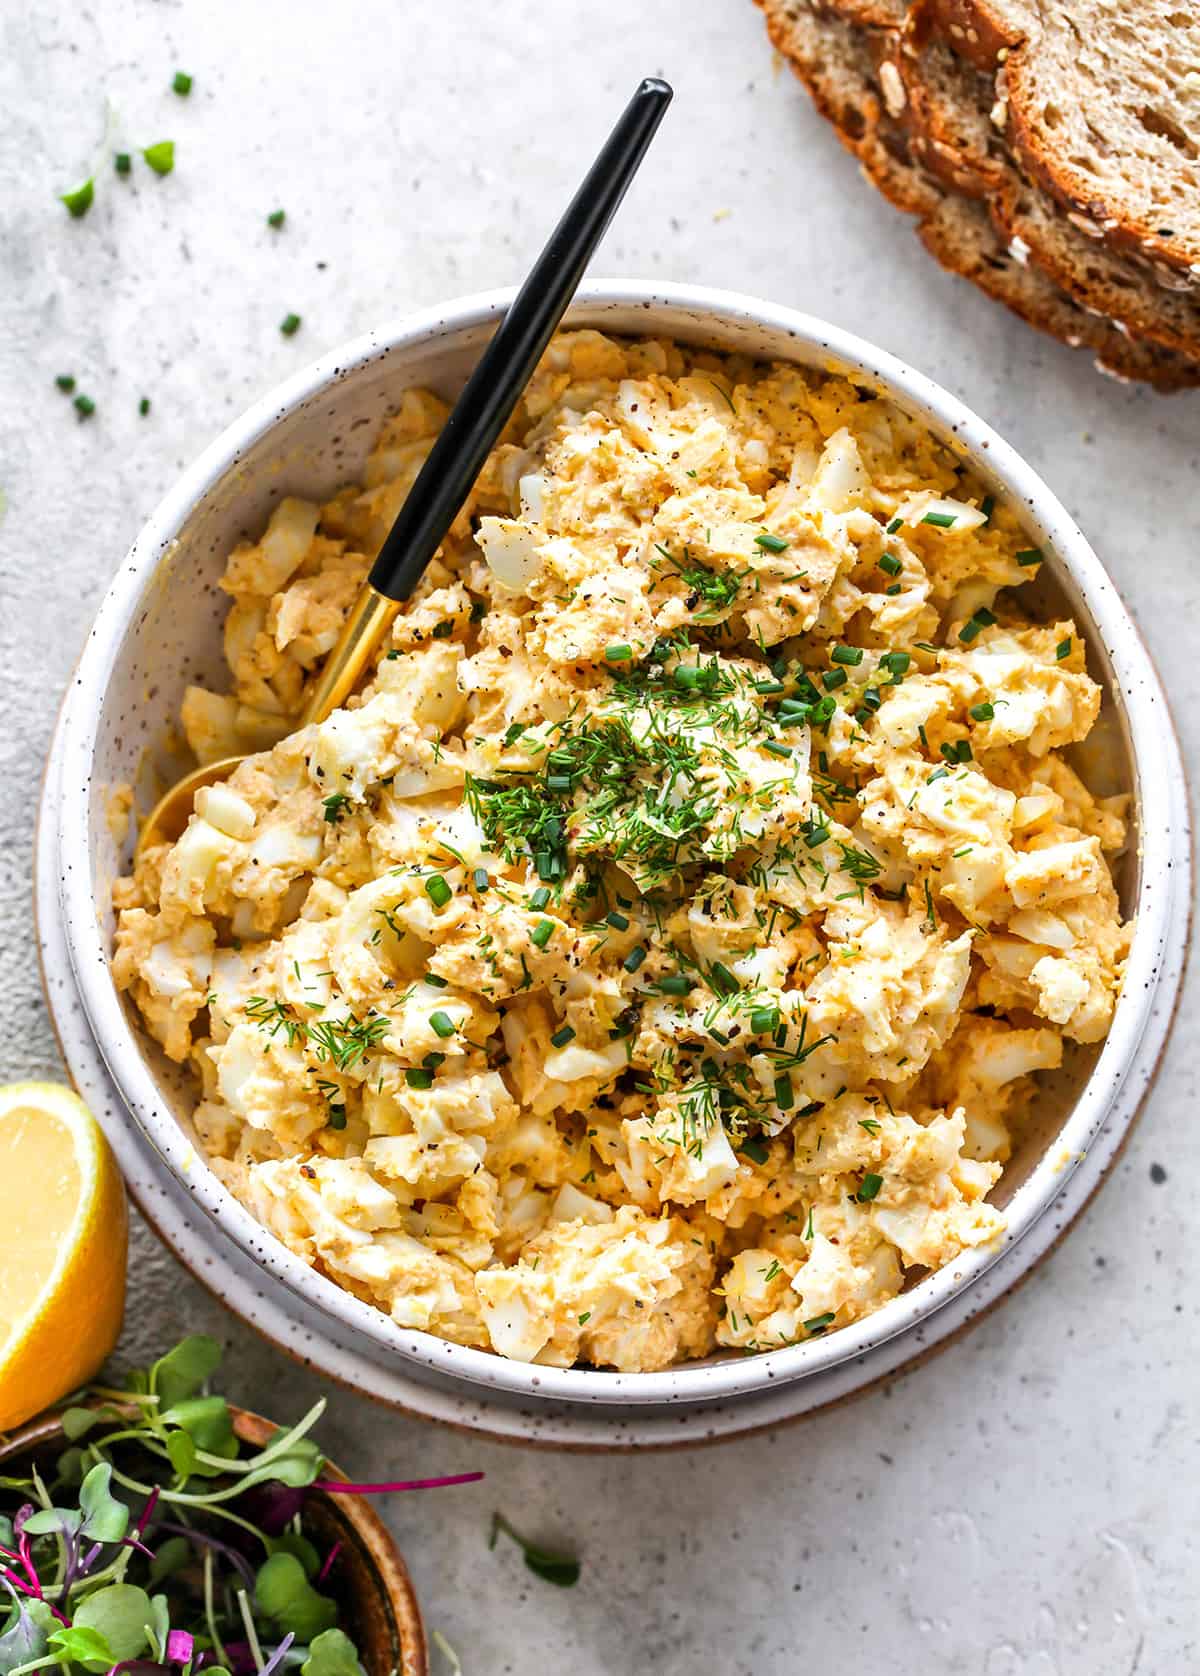 Egg Salad Recipe in a bowl garnished with herbs